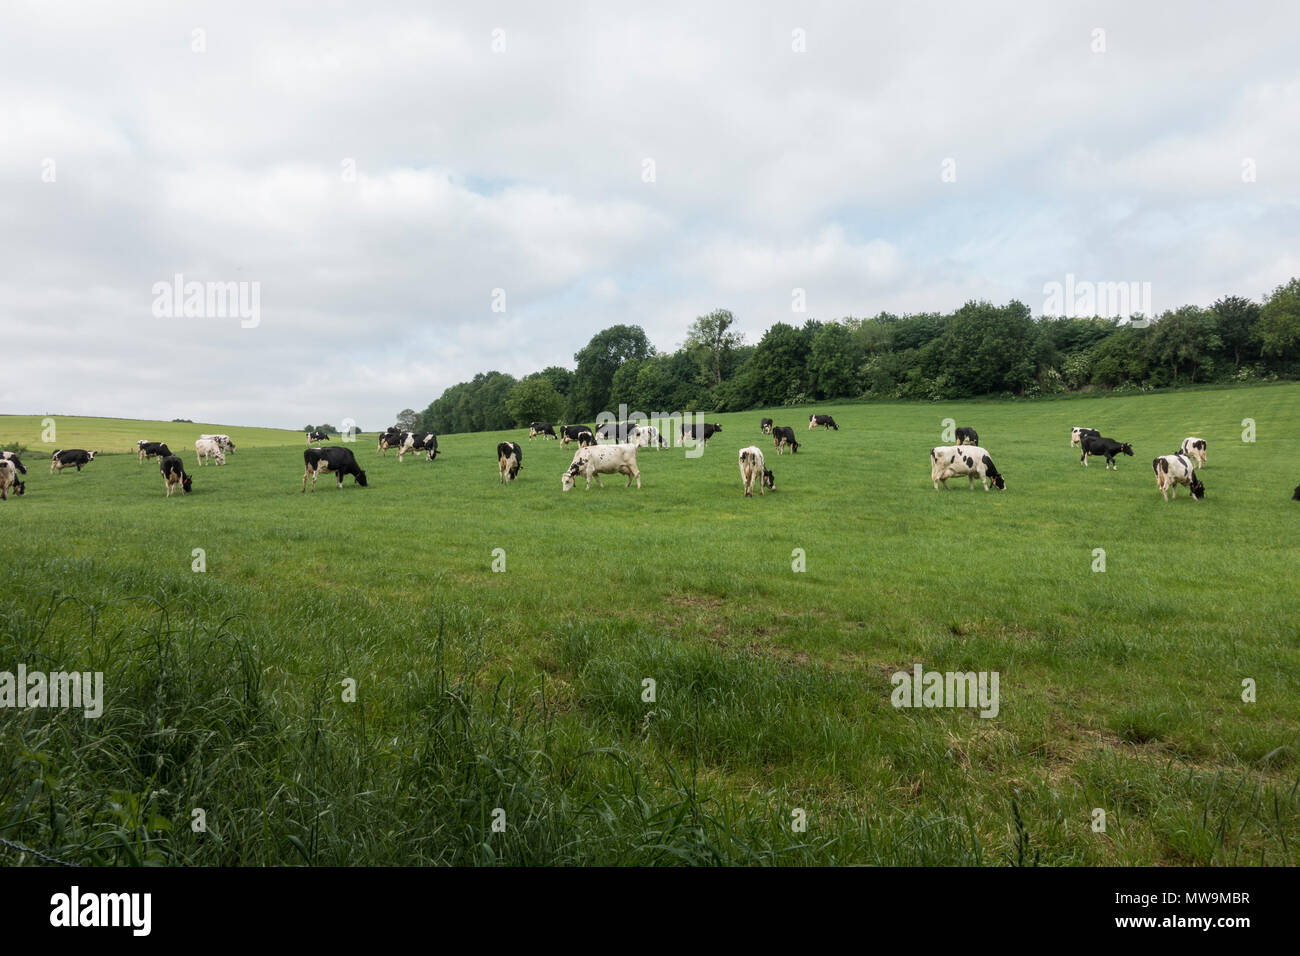 Les bovins laitiers , Cows grazing in grass field, Limbourg, Pays-Bas. Banque D'Images